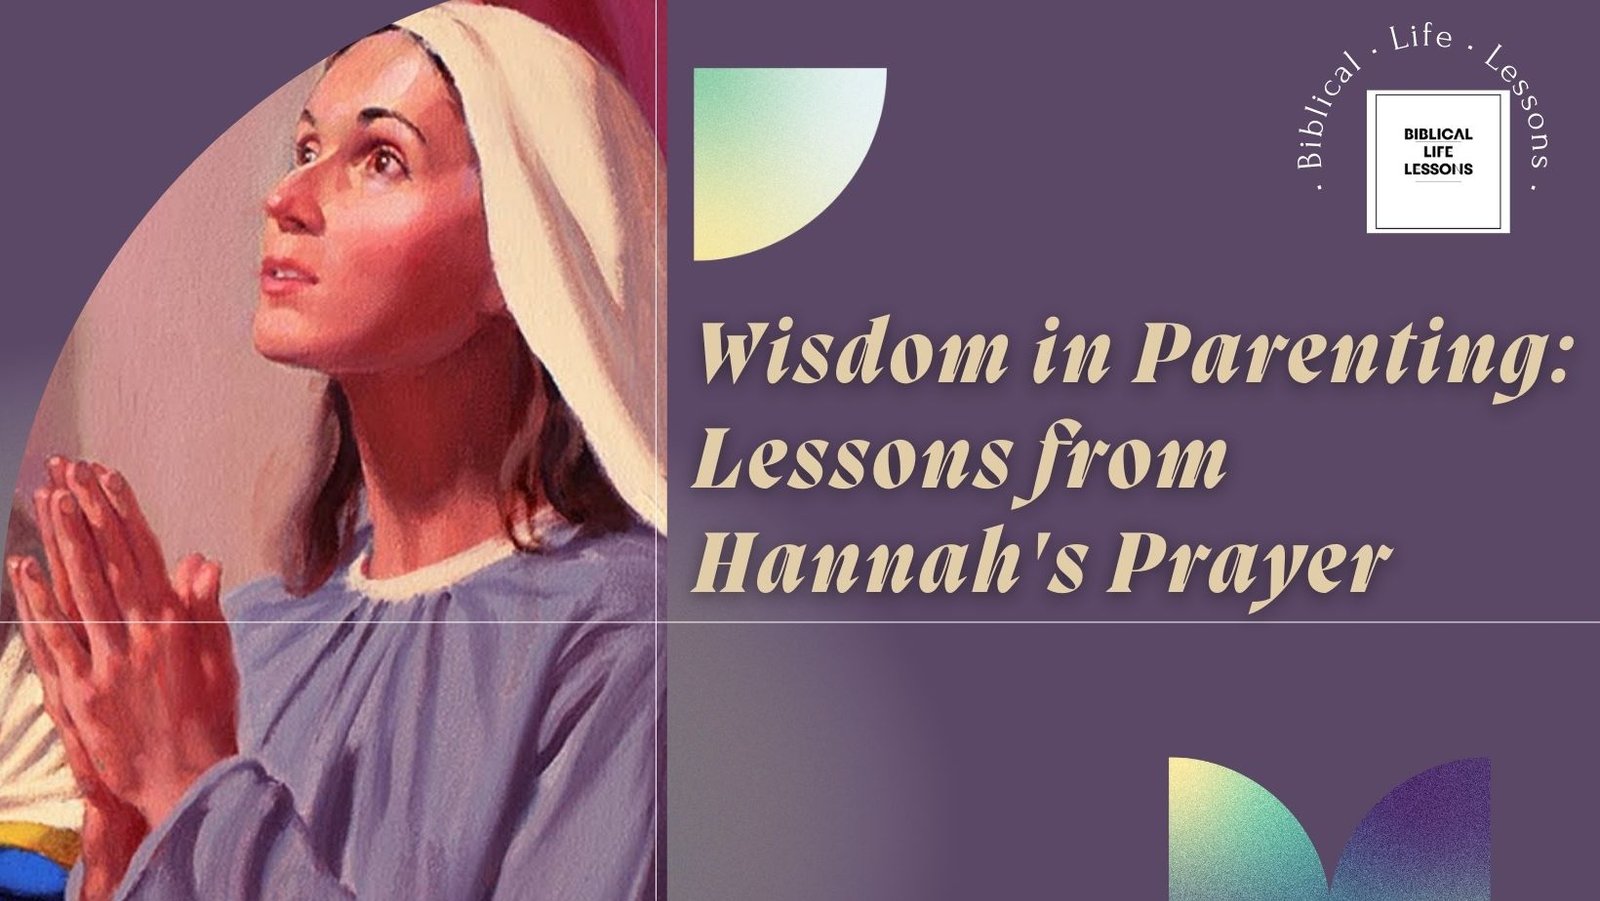 Parenting Wisdom: Lessons from Hannah's Prayer